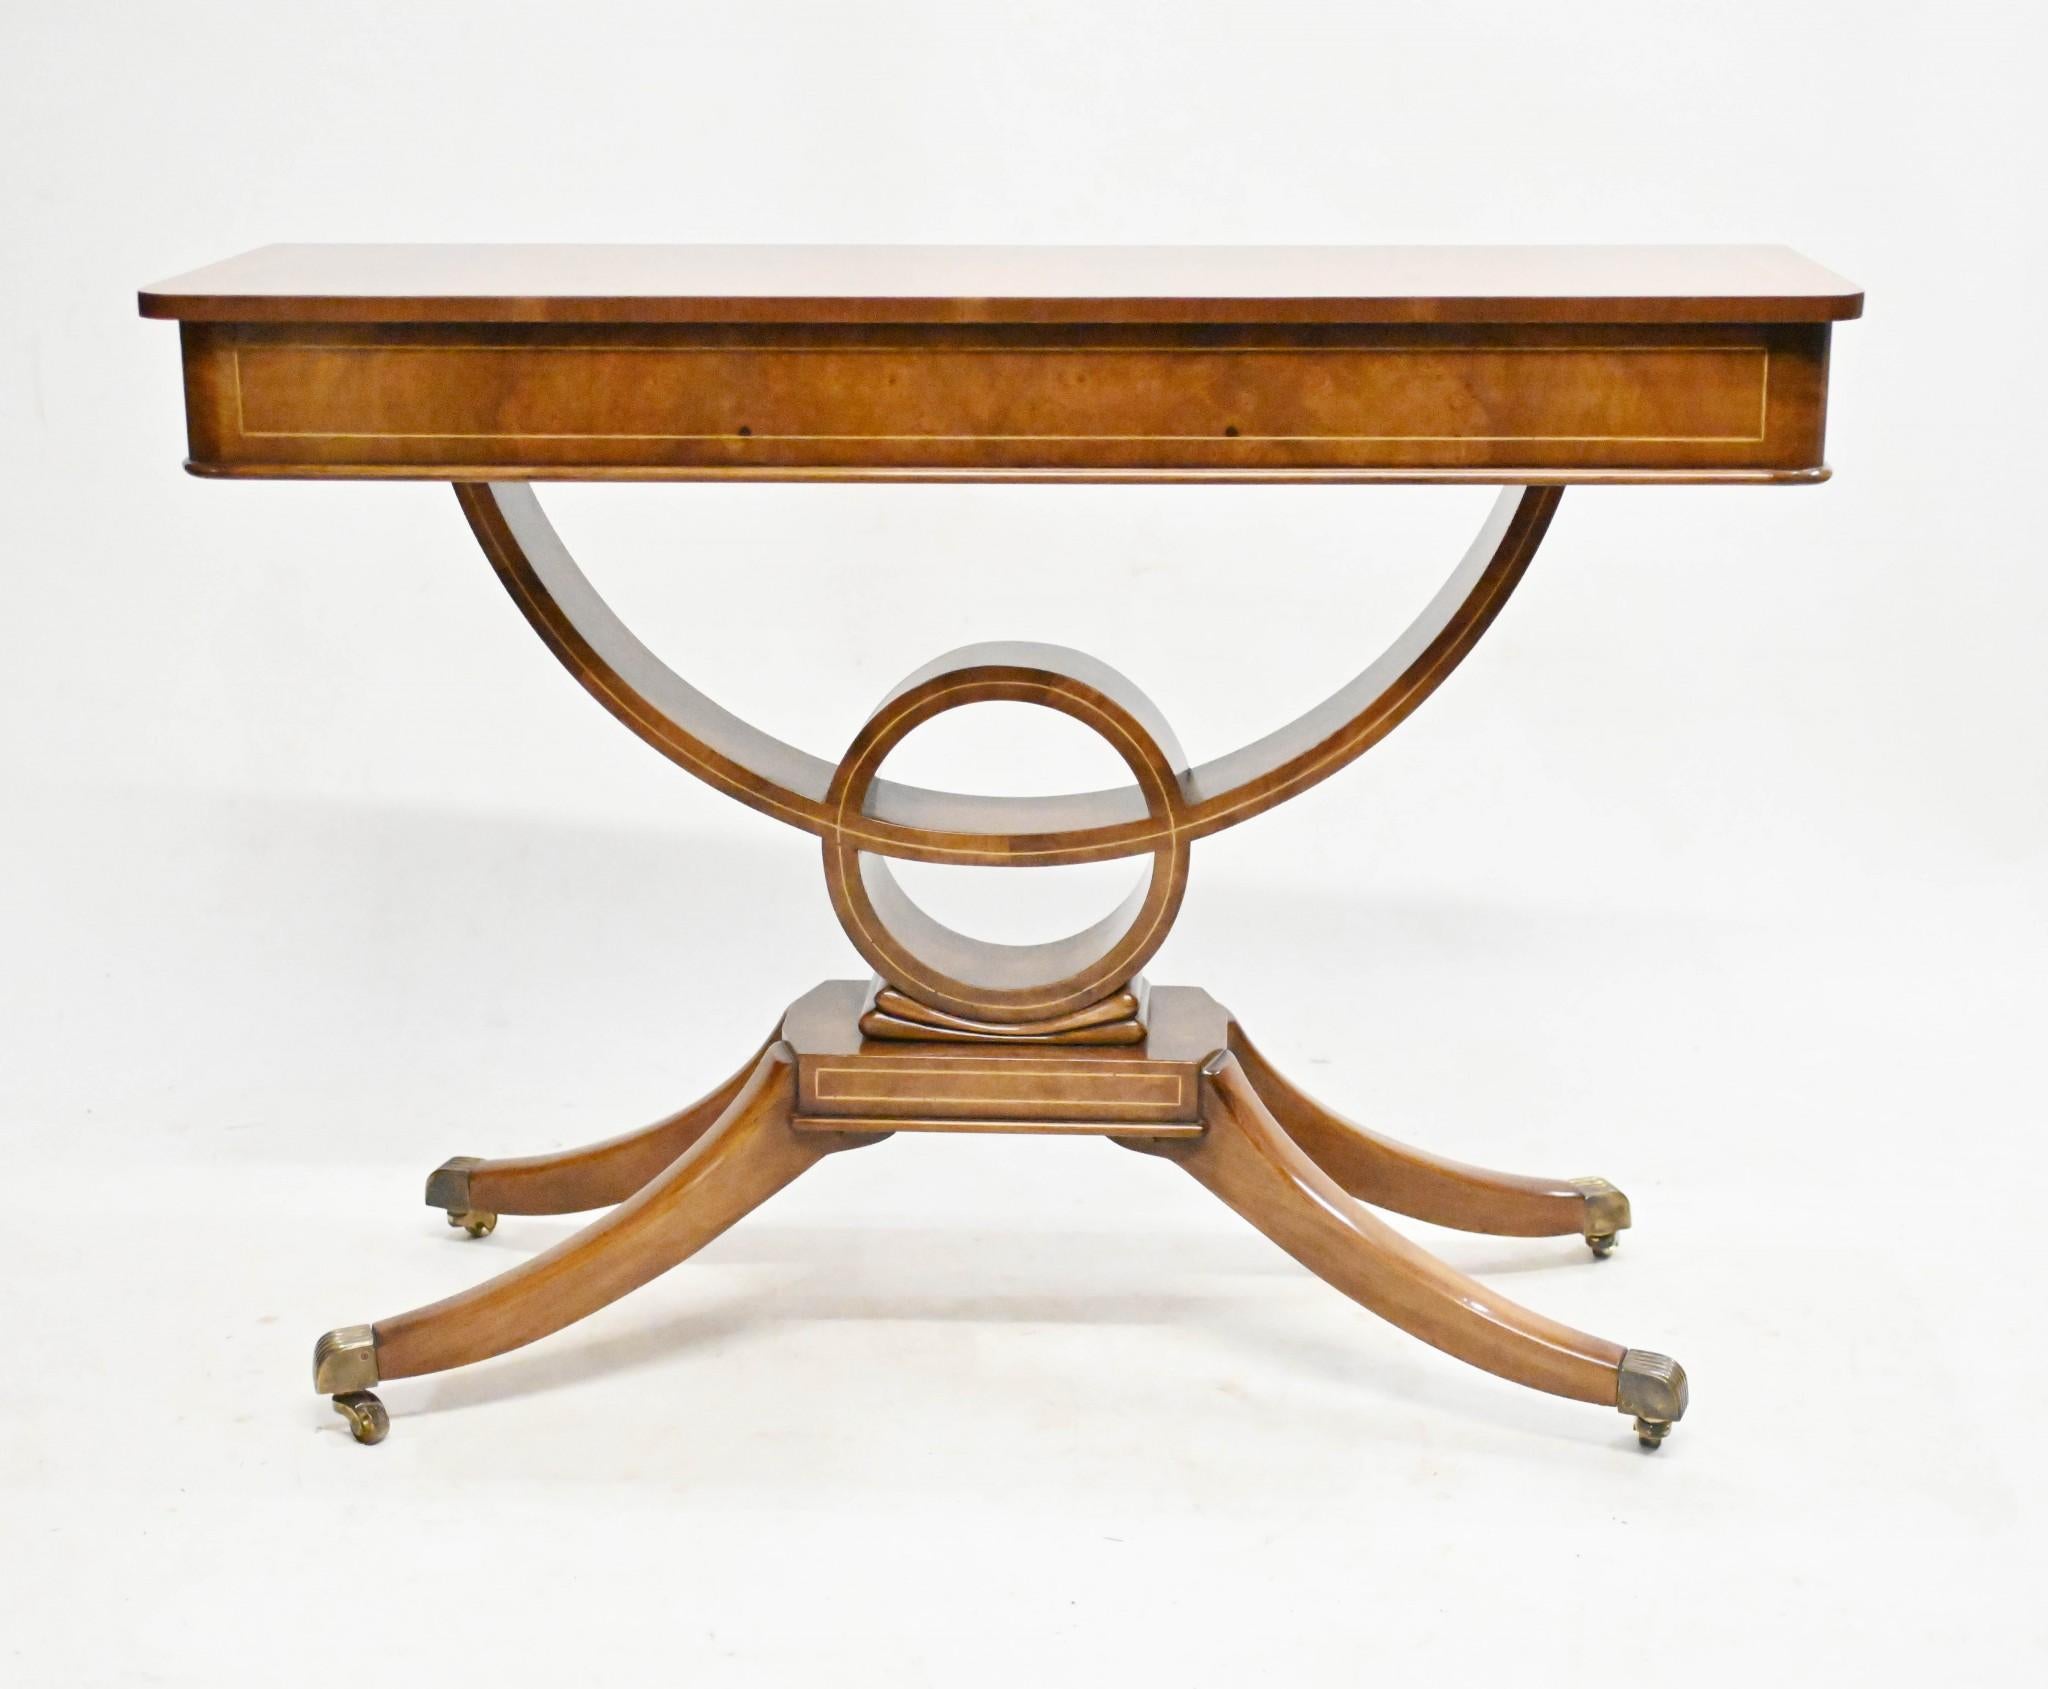 High end Regency revival console table in walnut
Such a clean and classical piece refined for contemporary interiors
Love the base on four splayed feet
Offered in great condition ready for home use right away
Will ship to anywhere in the world -